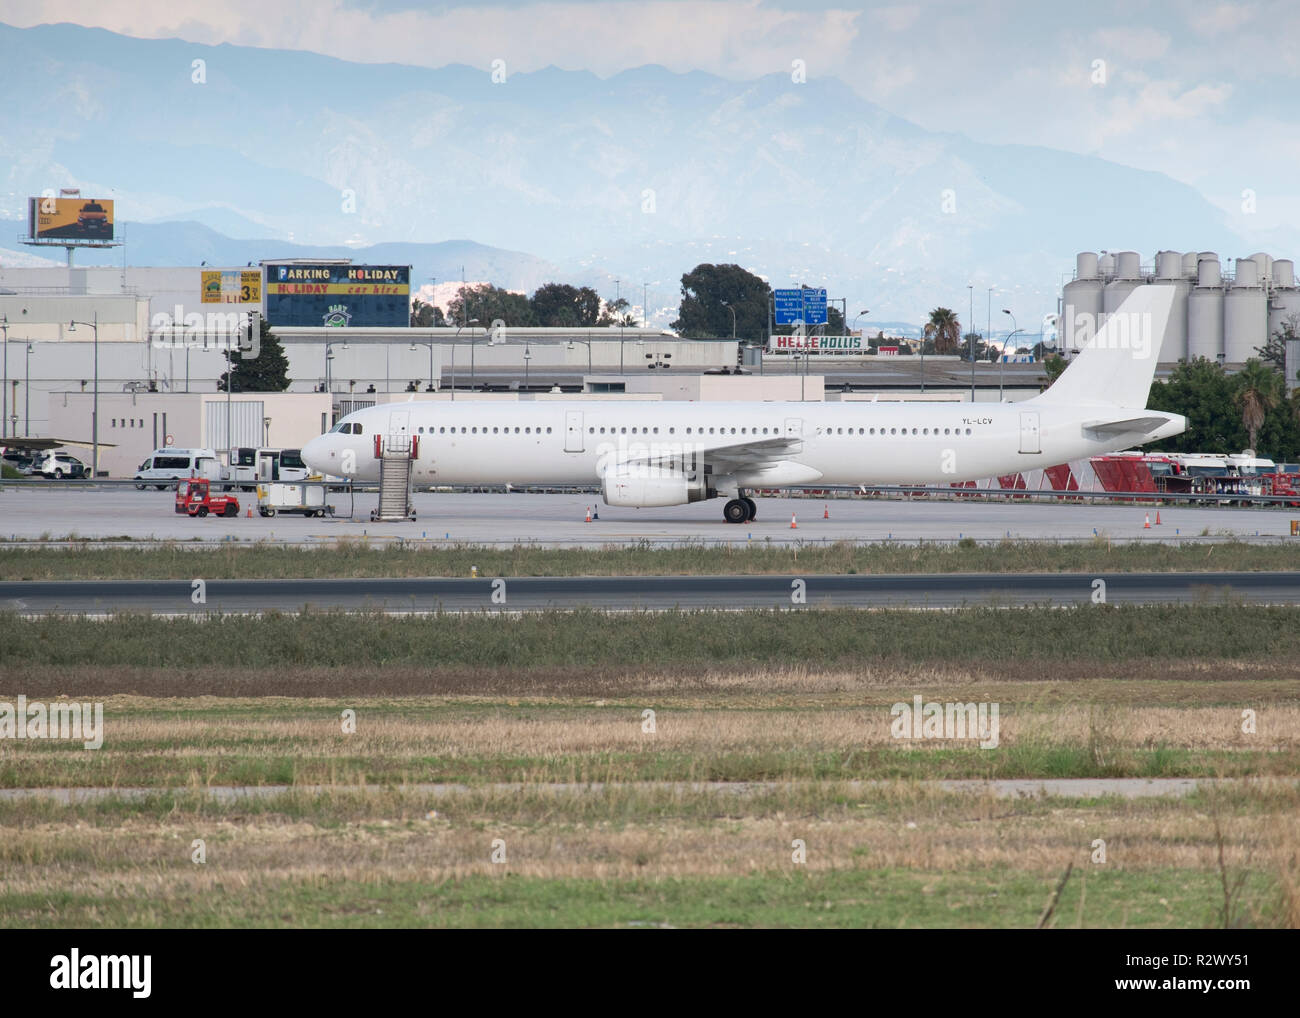 Airbus A32-231 of SmarLynx Airlines at Málaga airport, Spain Stock Photo -  Alamy